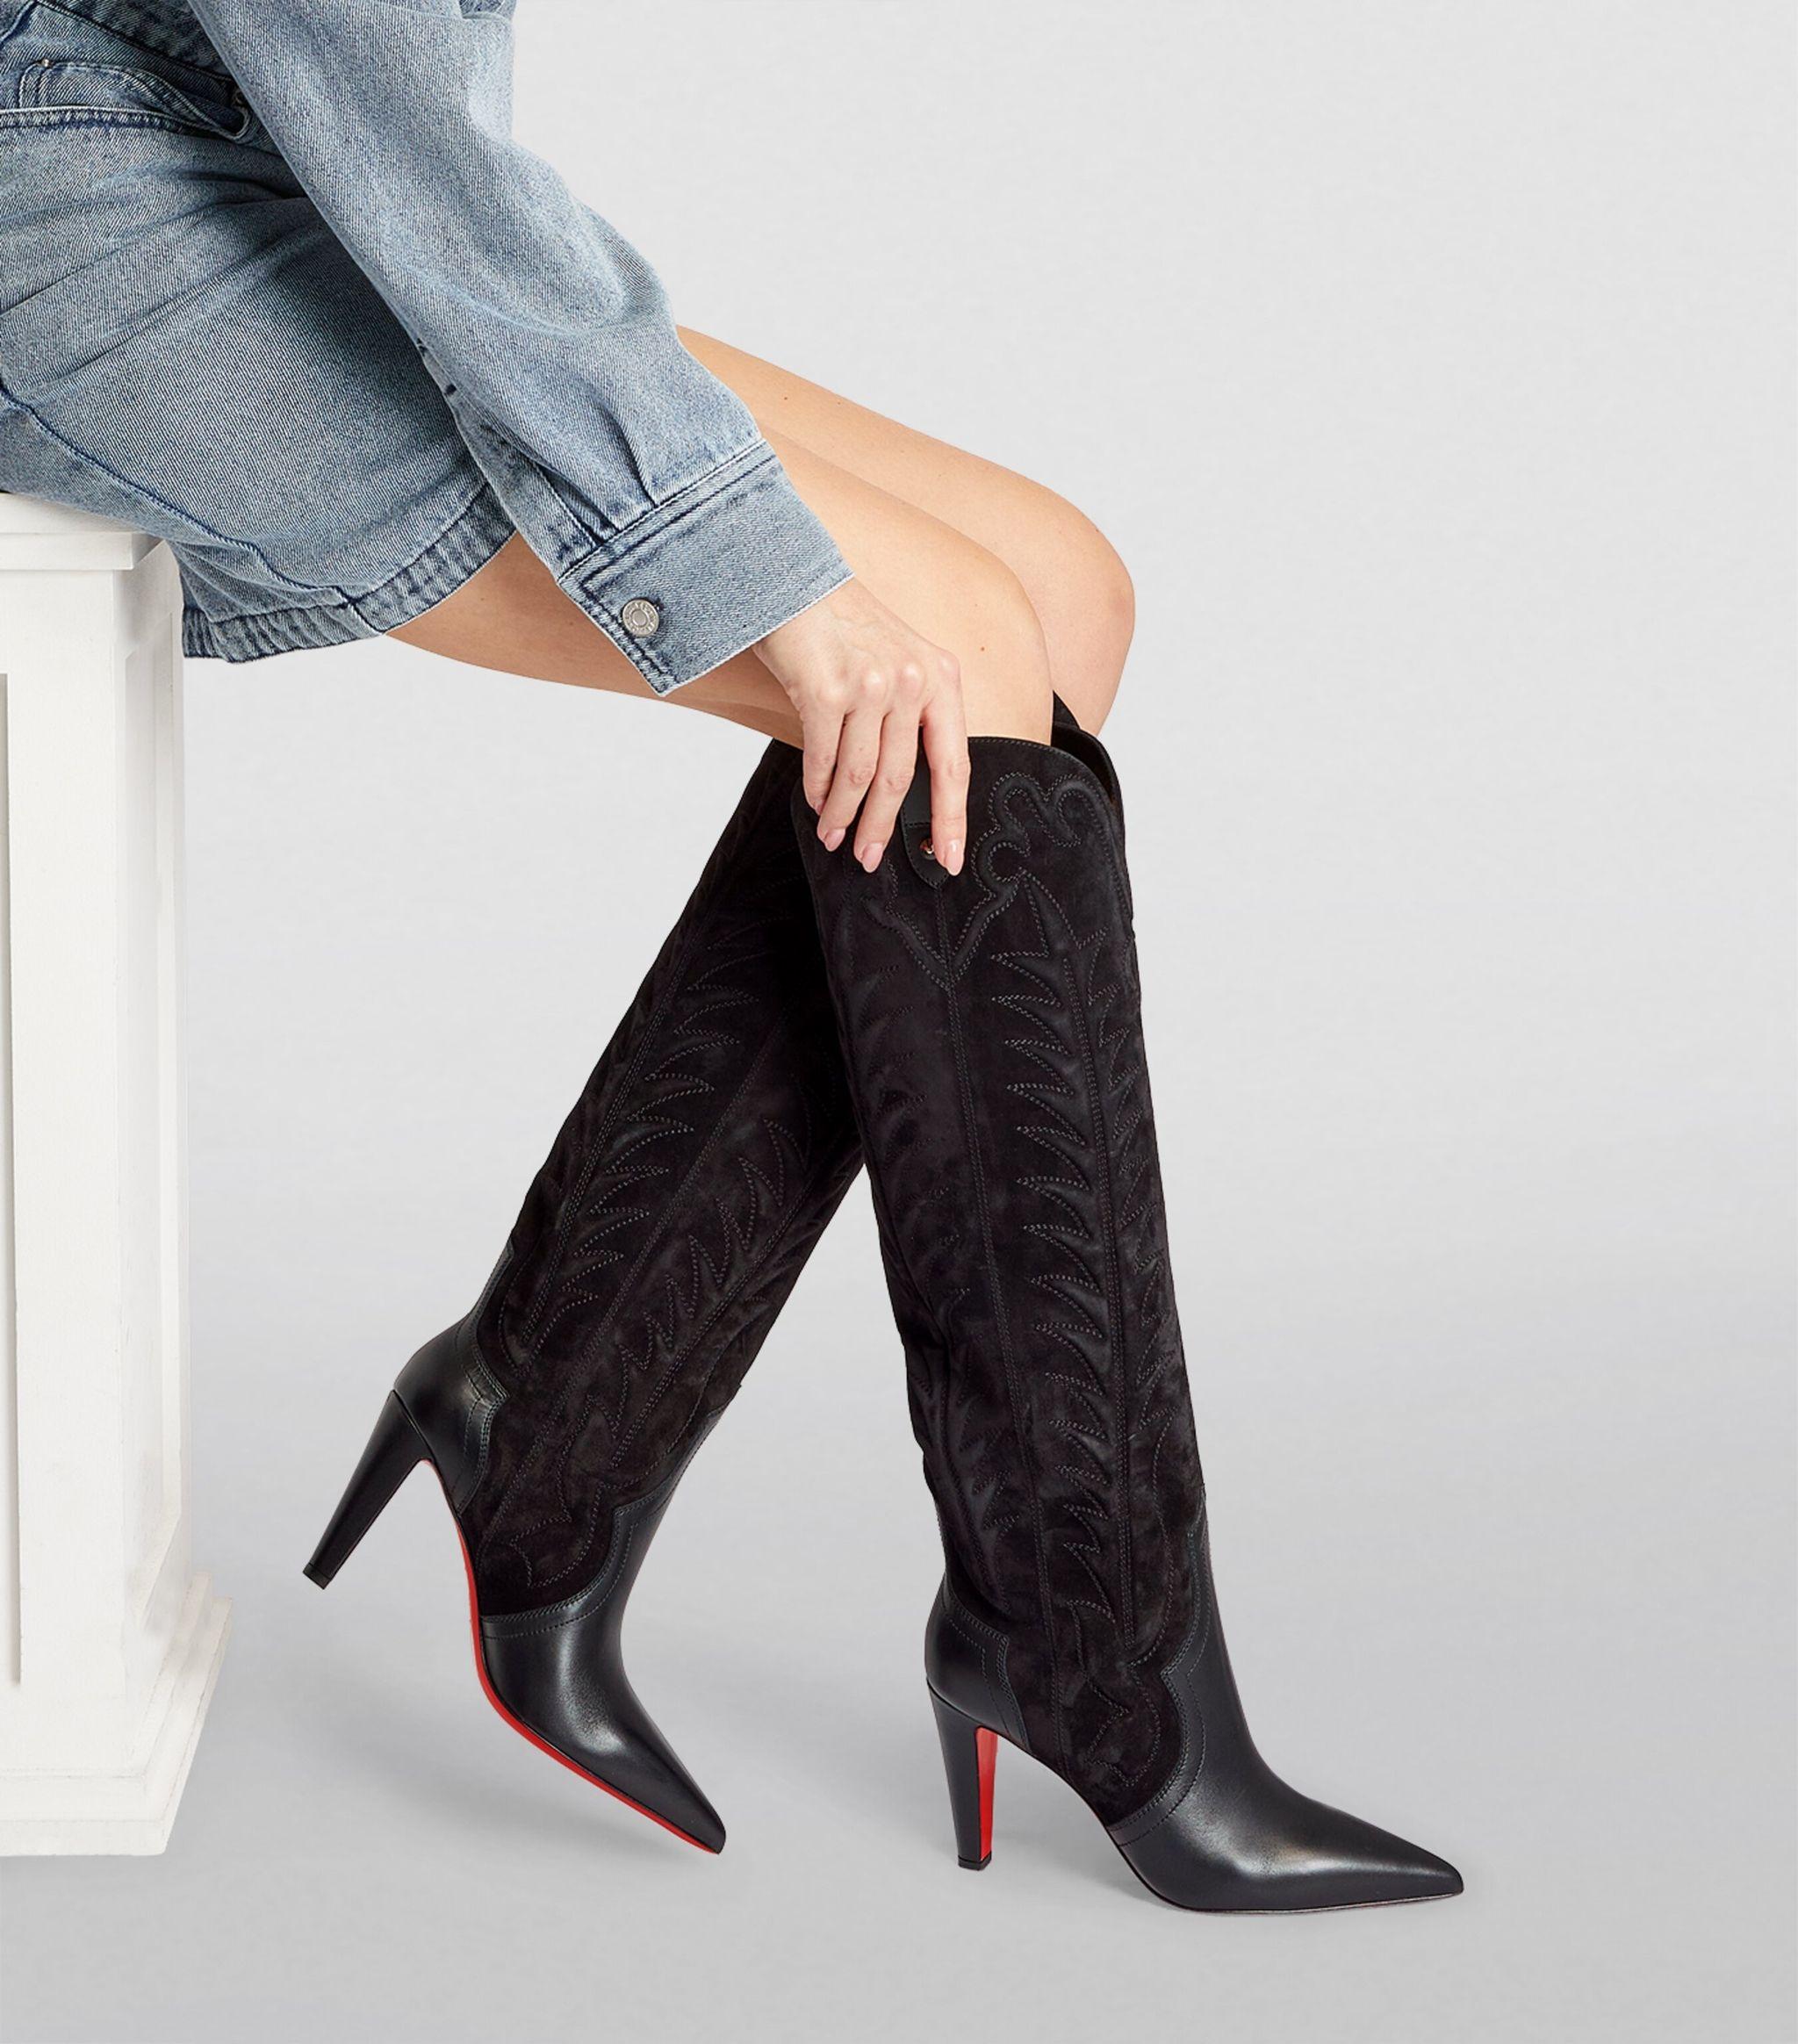 Christian Louboutin Santia Botta Suede-leather Boots 85 in Black